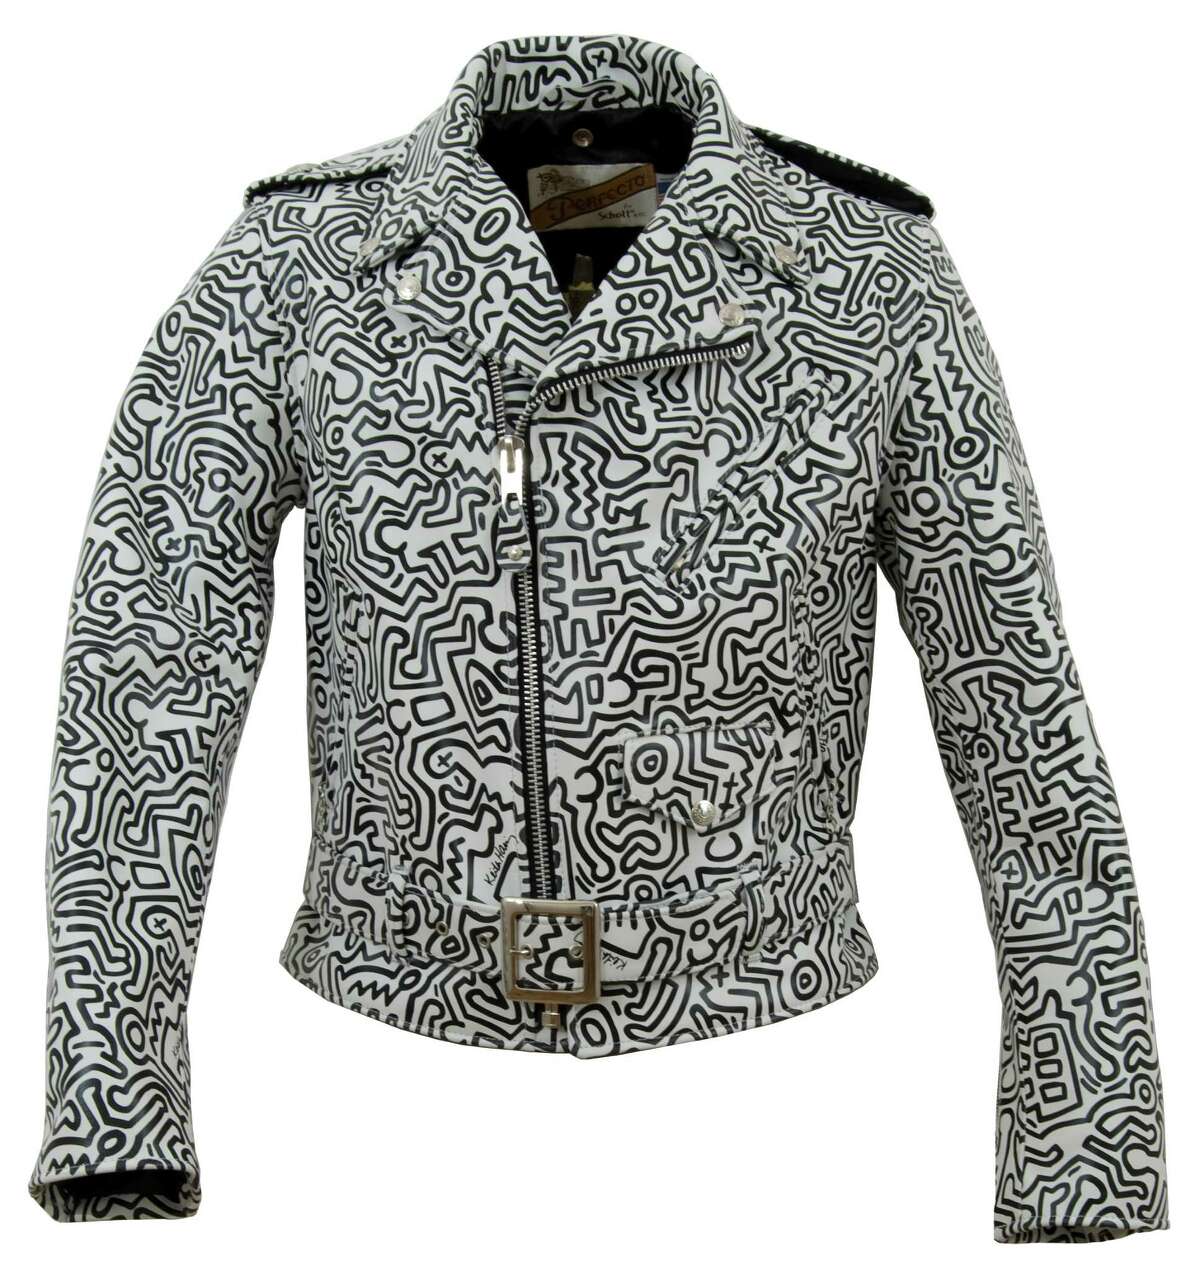 Schott leather jacket with Keith Haring print by Jeremy Scott.